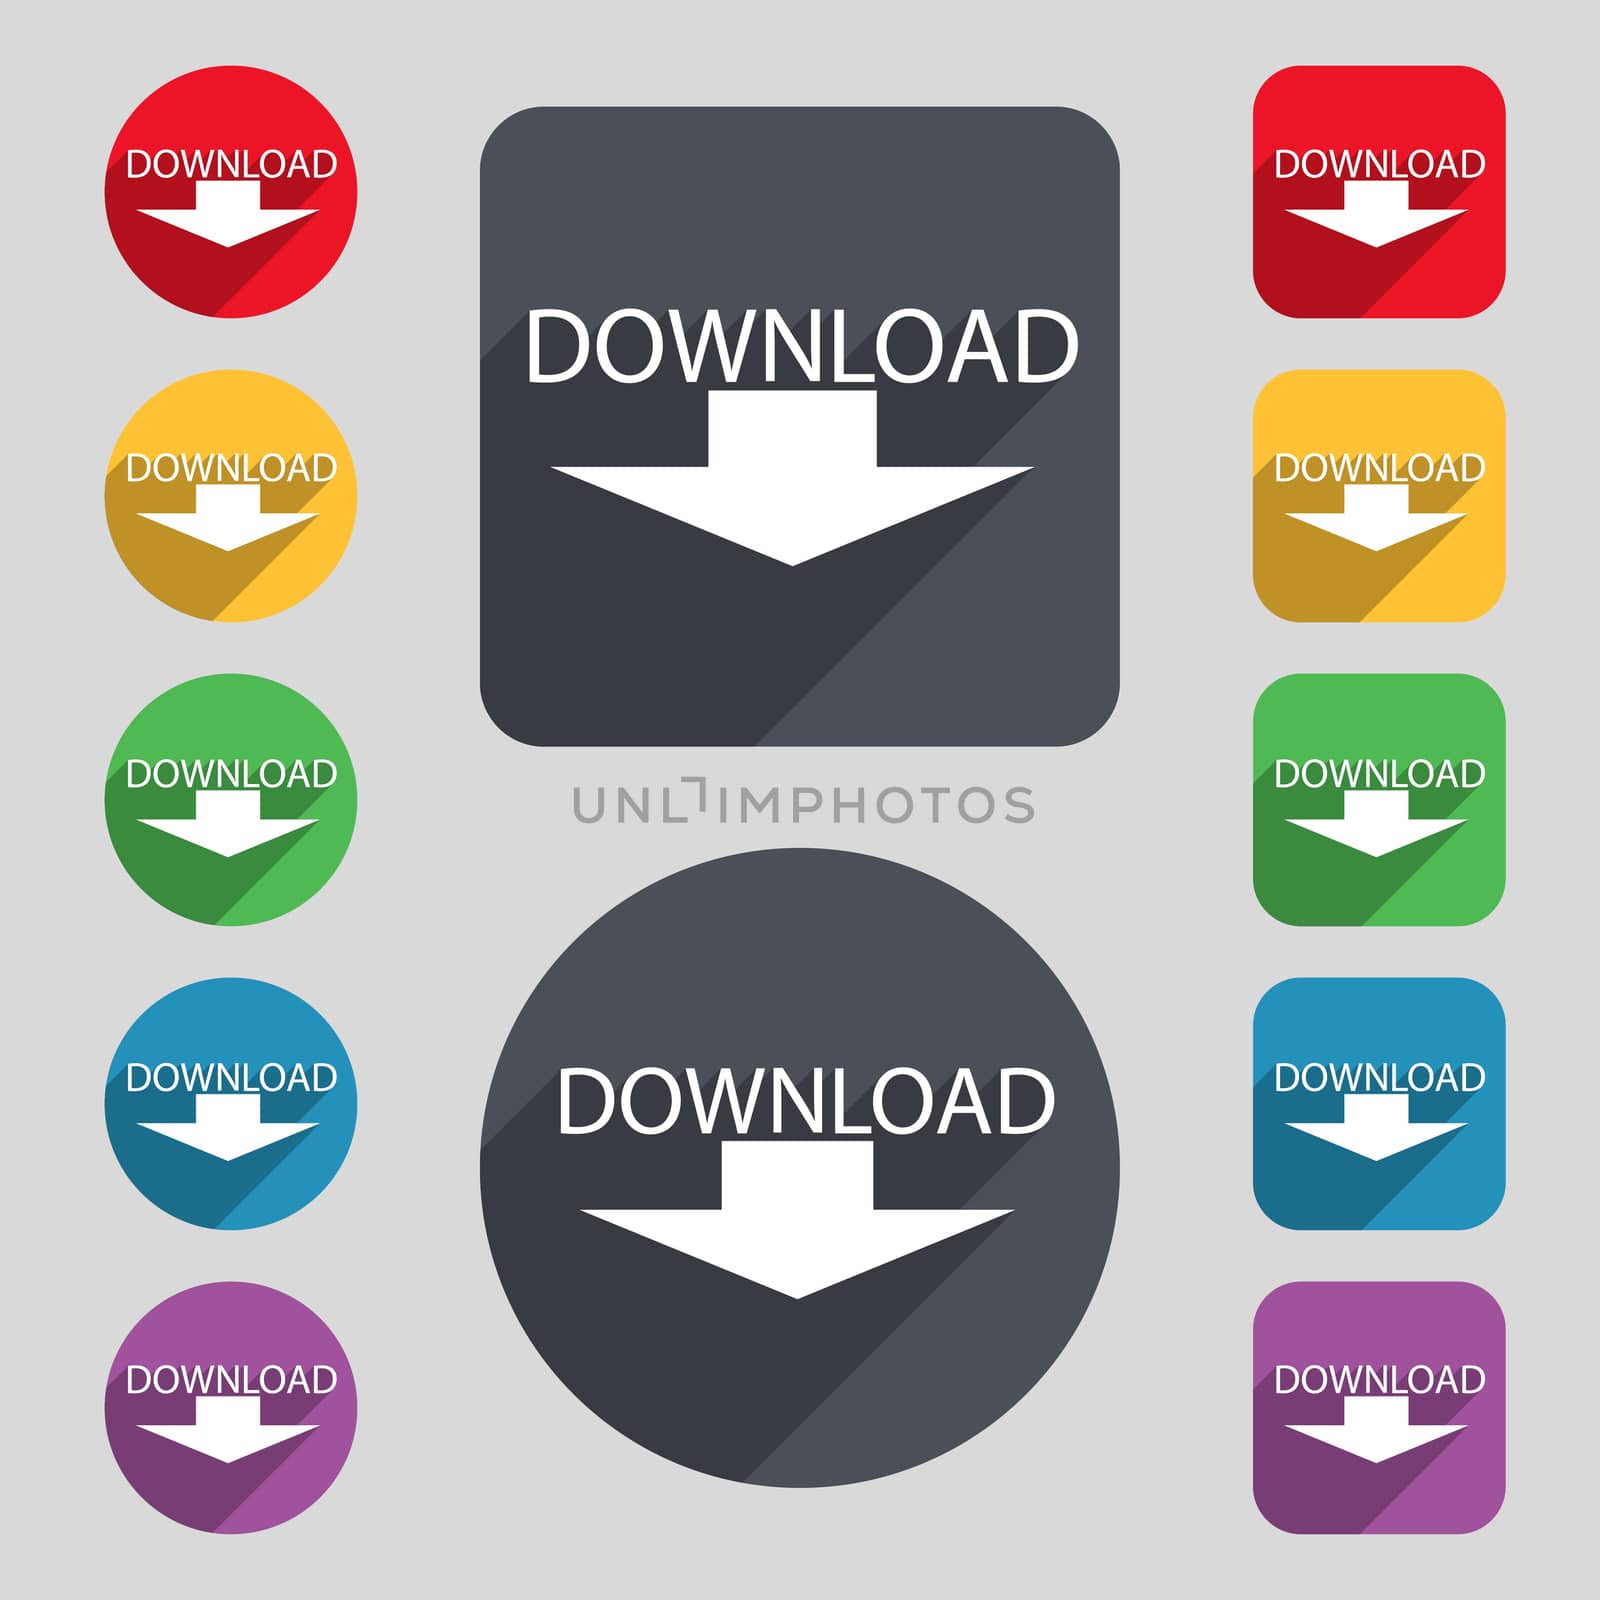 Download icon. Upload button. Load symbol. Set of colored buttons. illustration